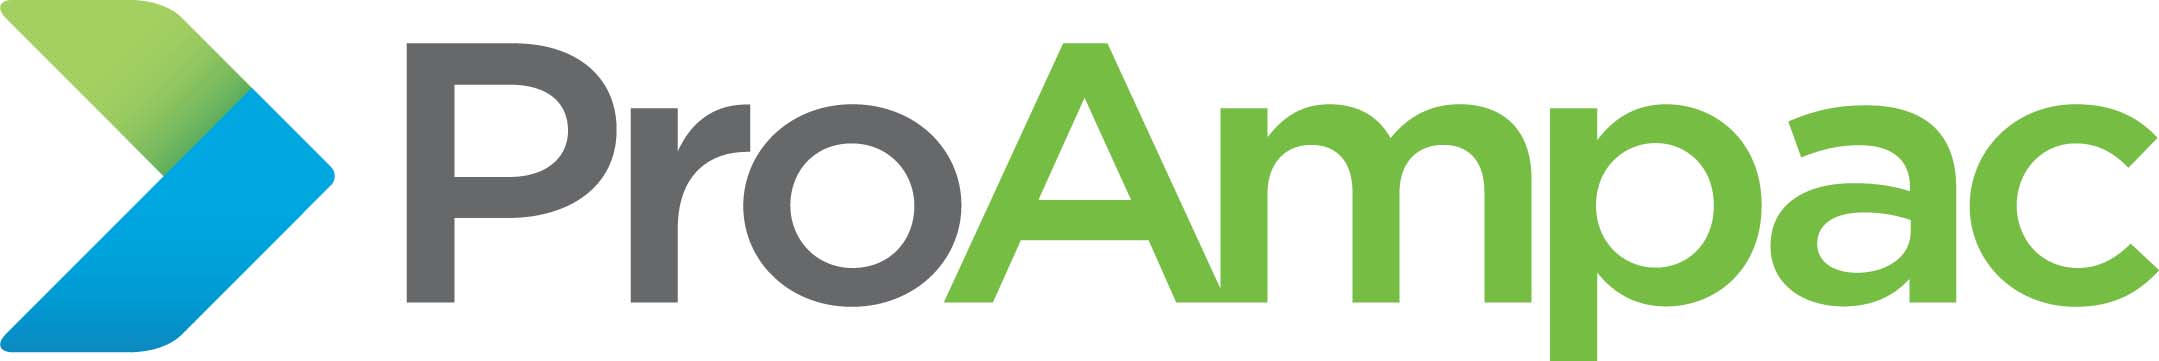 proampac_logo_color_low_res_new